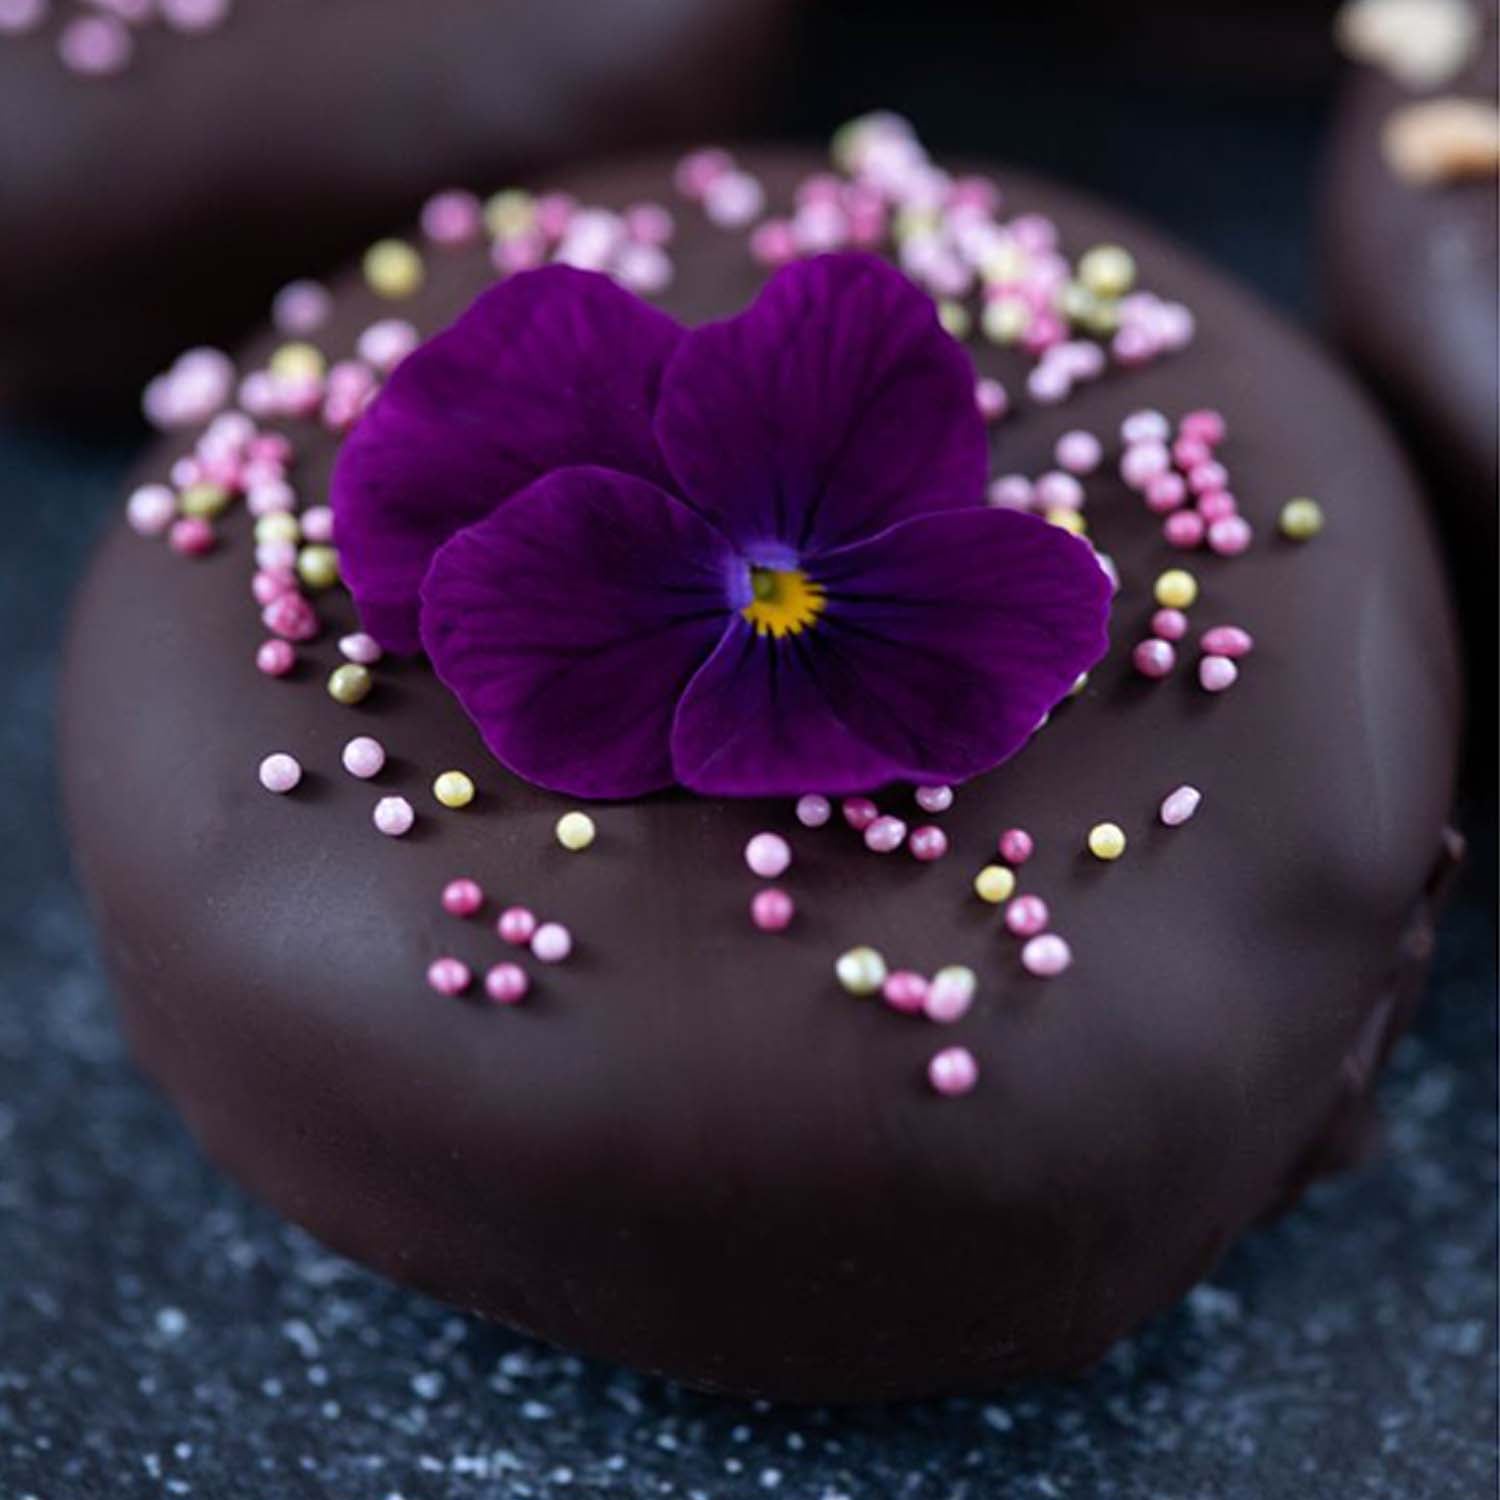 Experience The Flavors of Spring with Fresh Edible Flowers